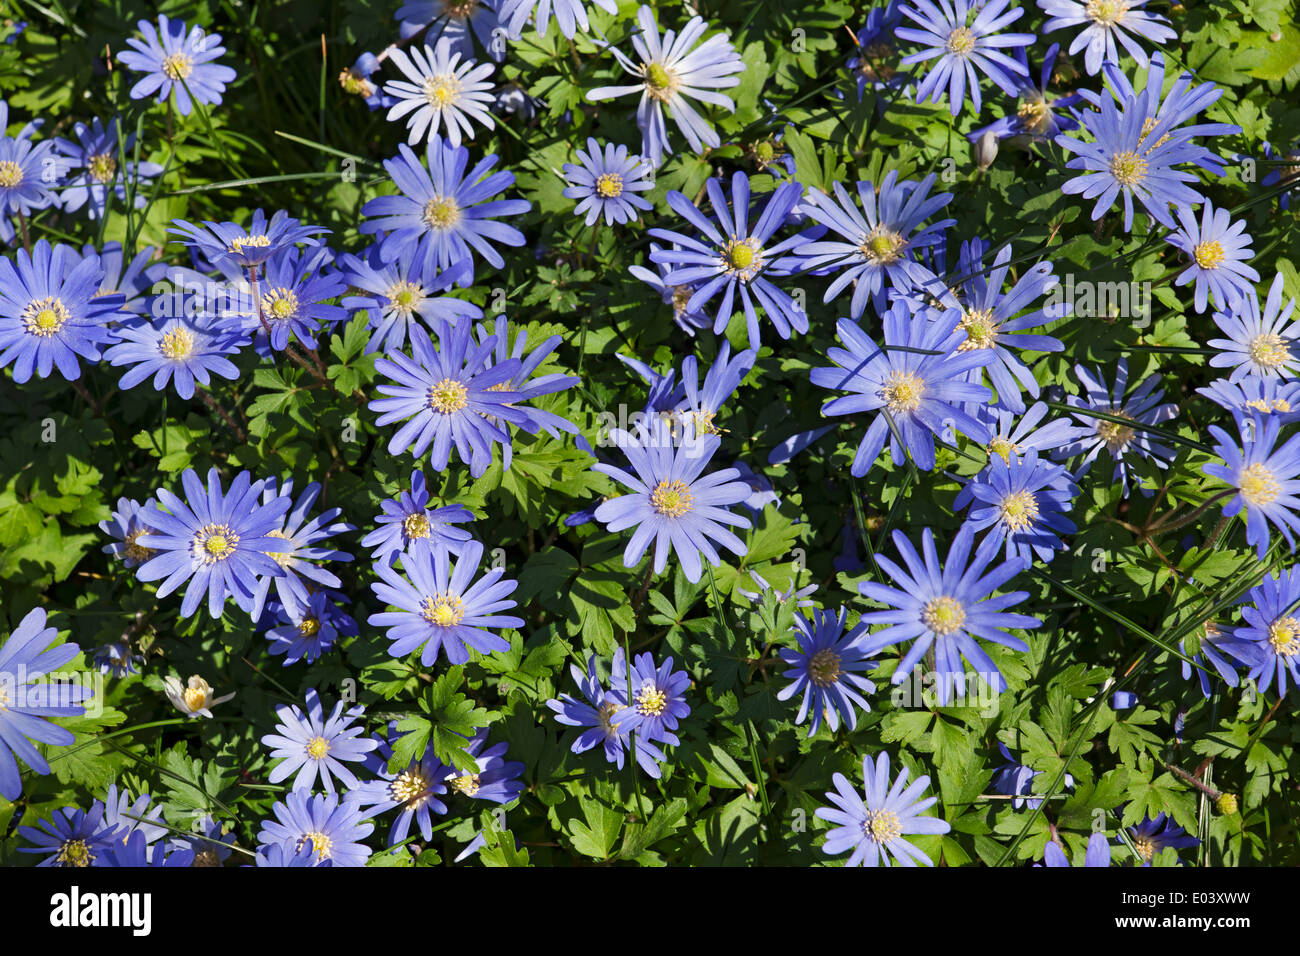 Close up of Blue anemone flowers anemones flower flowering in spring garden England UK United Kingdom GB Great Britain Stock Photo